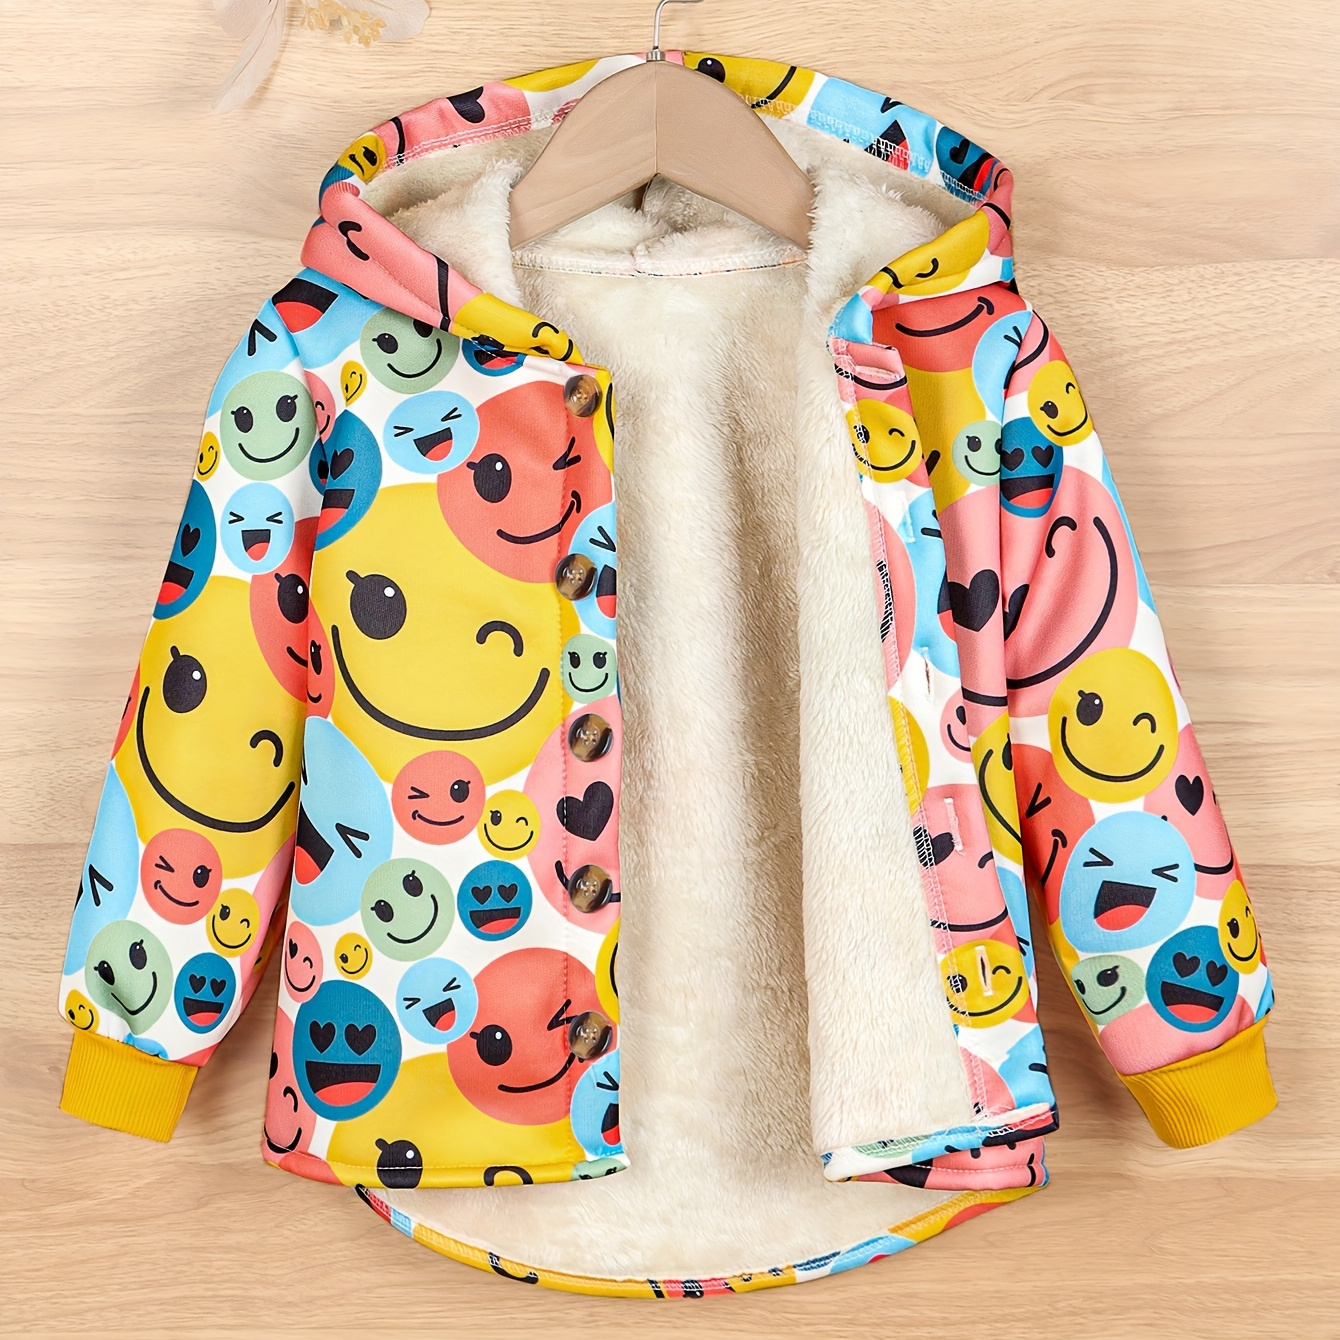 

Girls Fleece Smile Face Print Hooded Winter Jacket With Button Long Sleeve Hoodies For Autumn And Winter, Everyday